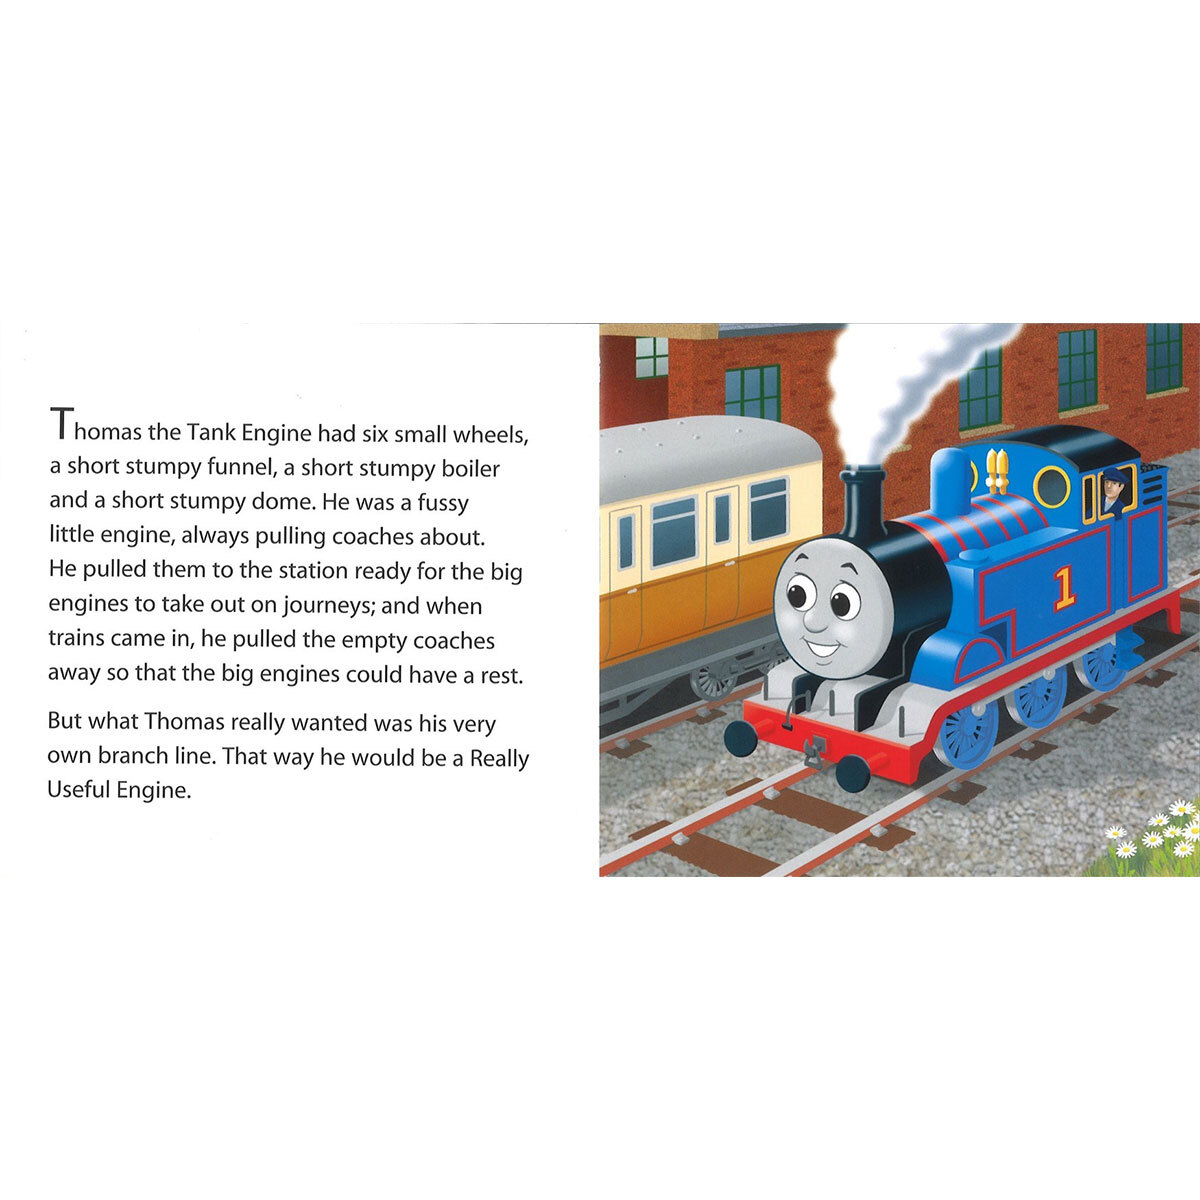 Page spread image of Thomas the Tank